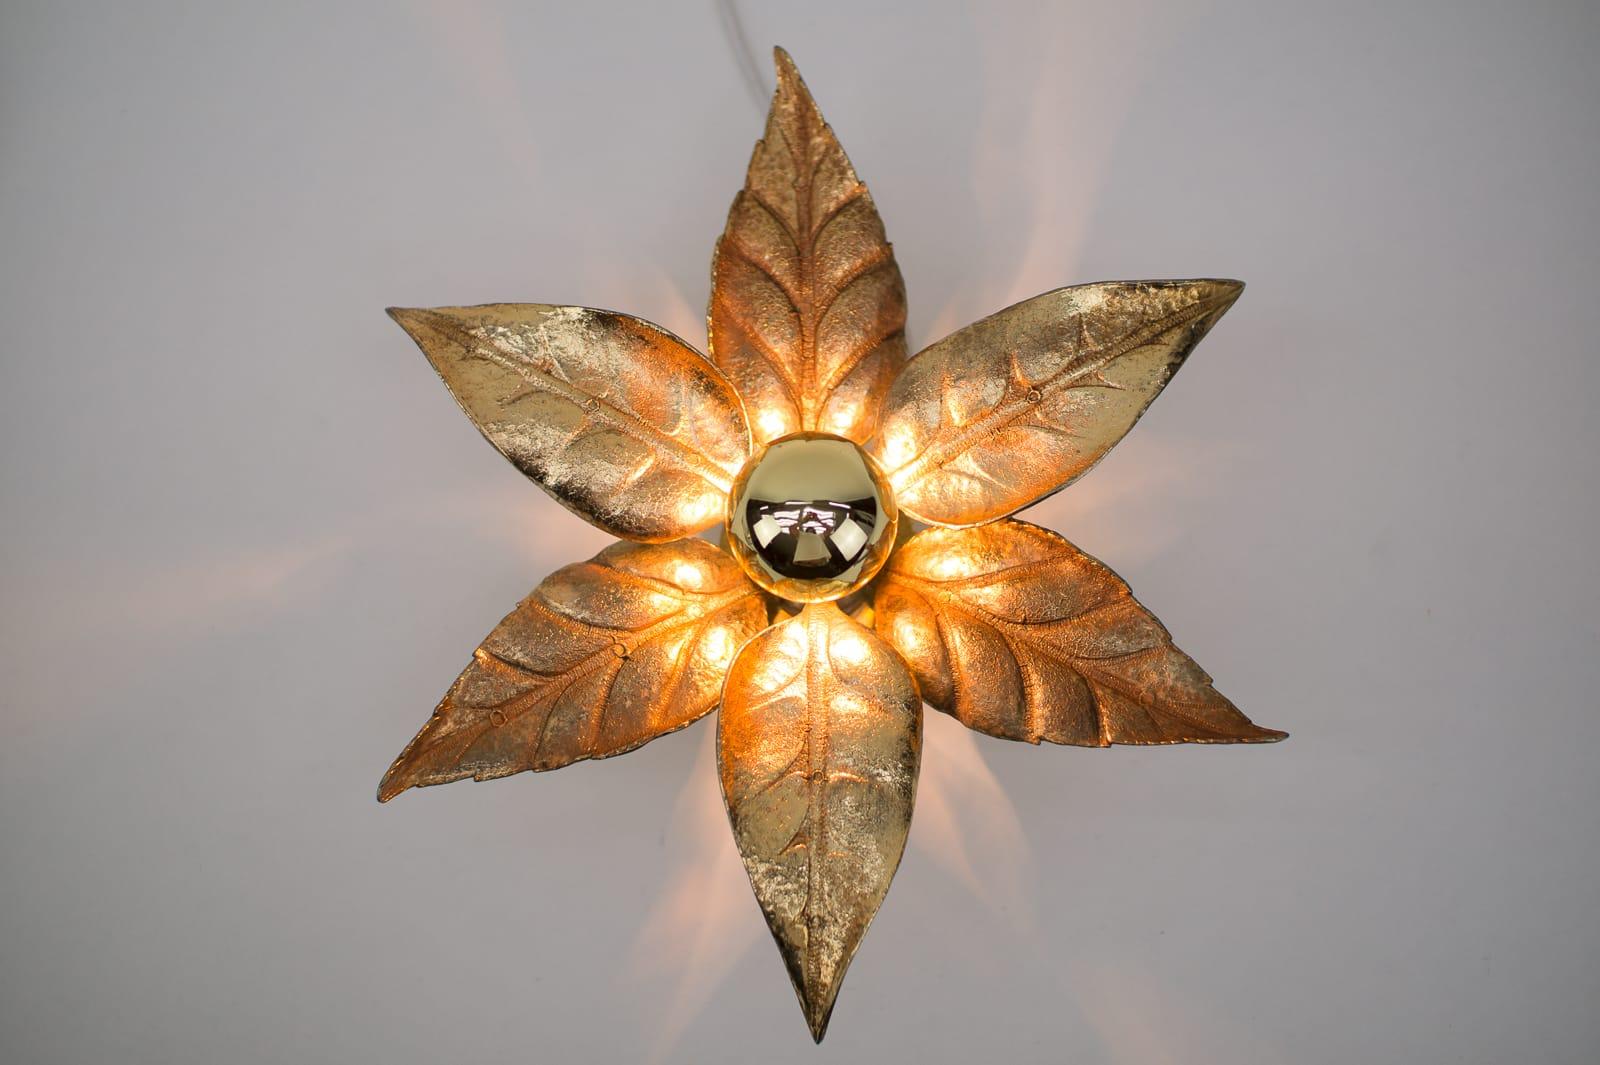 A gold wall sconce or wall light by Belgian designer Willy Daro for lighting manufacturer Massive. It has a wonderful naturalistic shape and is very decorative of the 1970s era.

The double lamp is 75cm long and 18cm depth, with bulb 22cm.

We have